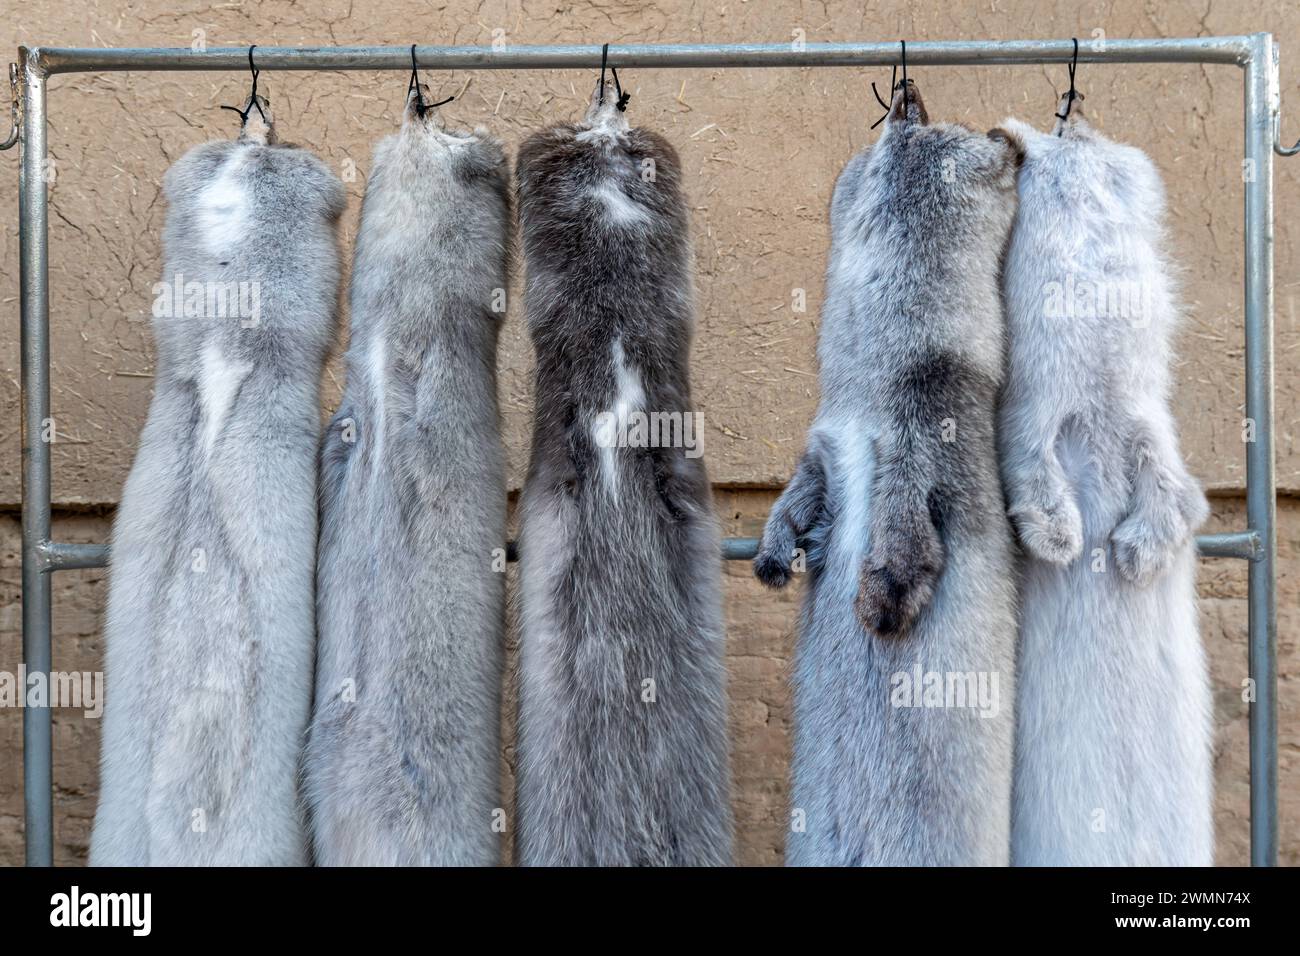 Mink Pelts. Animal fur. Stop wearing fur. Grey fur skins are hanging outside. Trade in fur products. Stock Photo